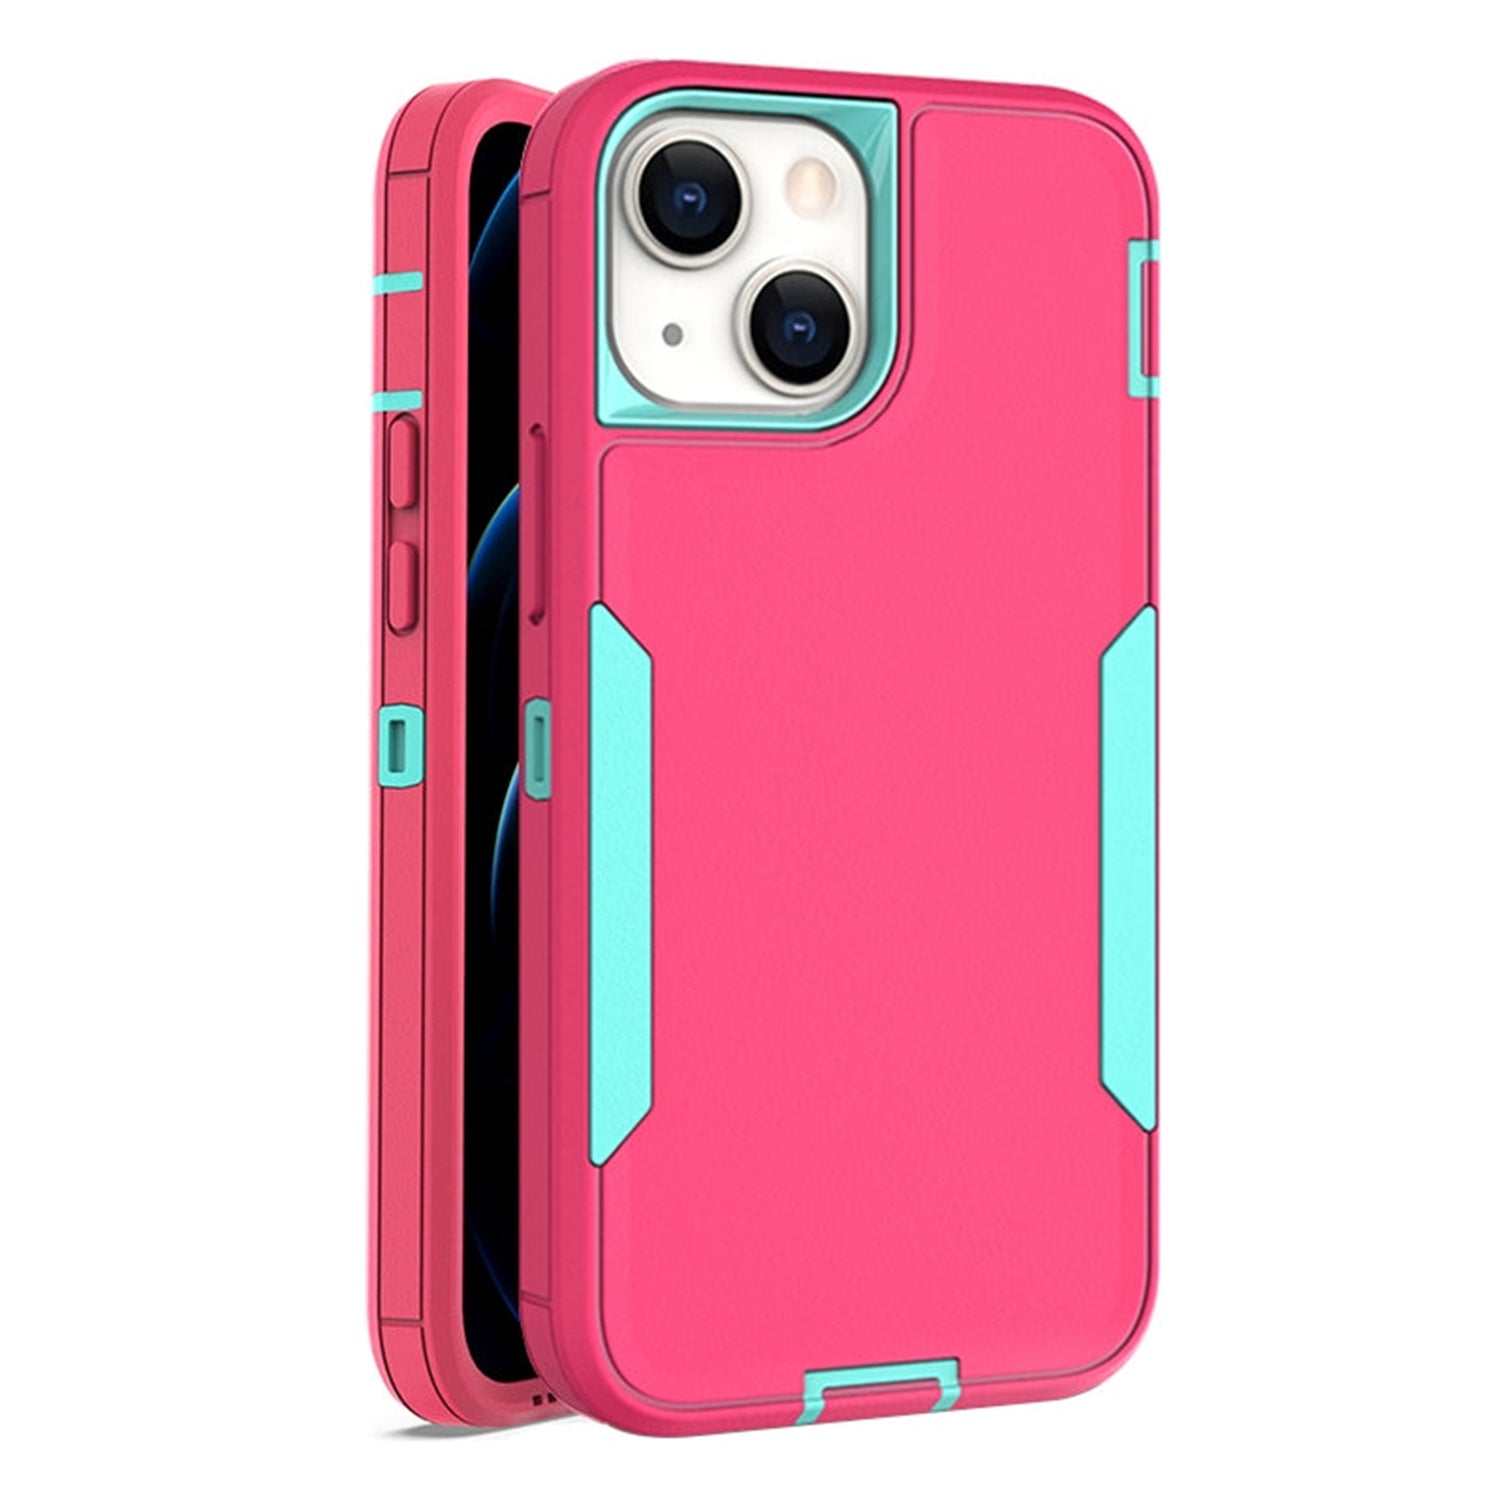 iPhone 13 mini Adsorbable  fully protected heavy-duty shockproof housing